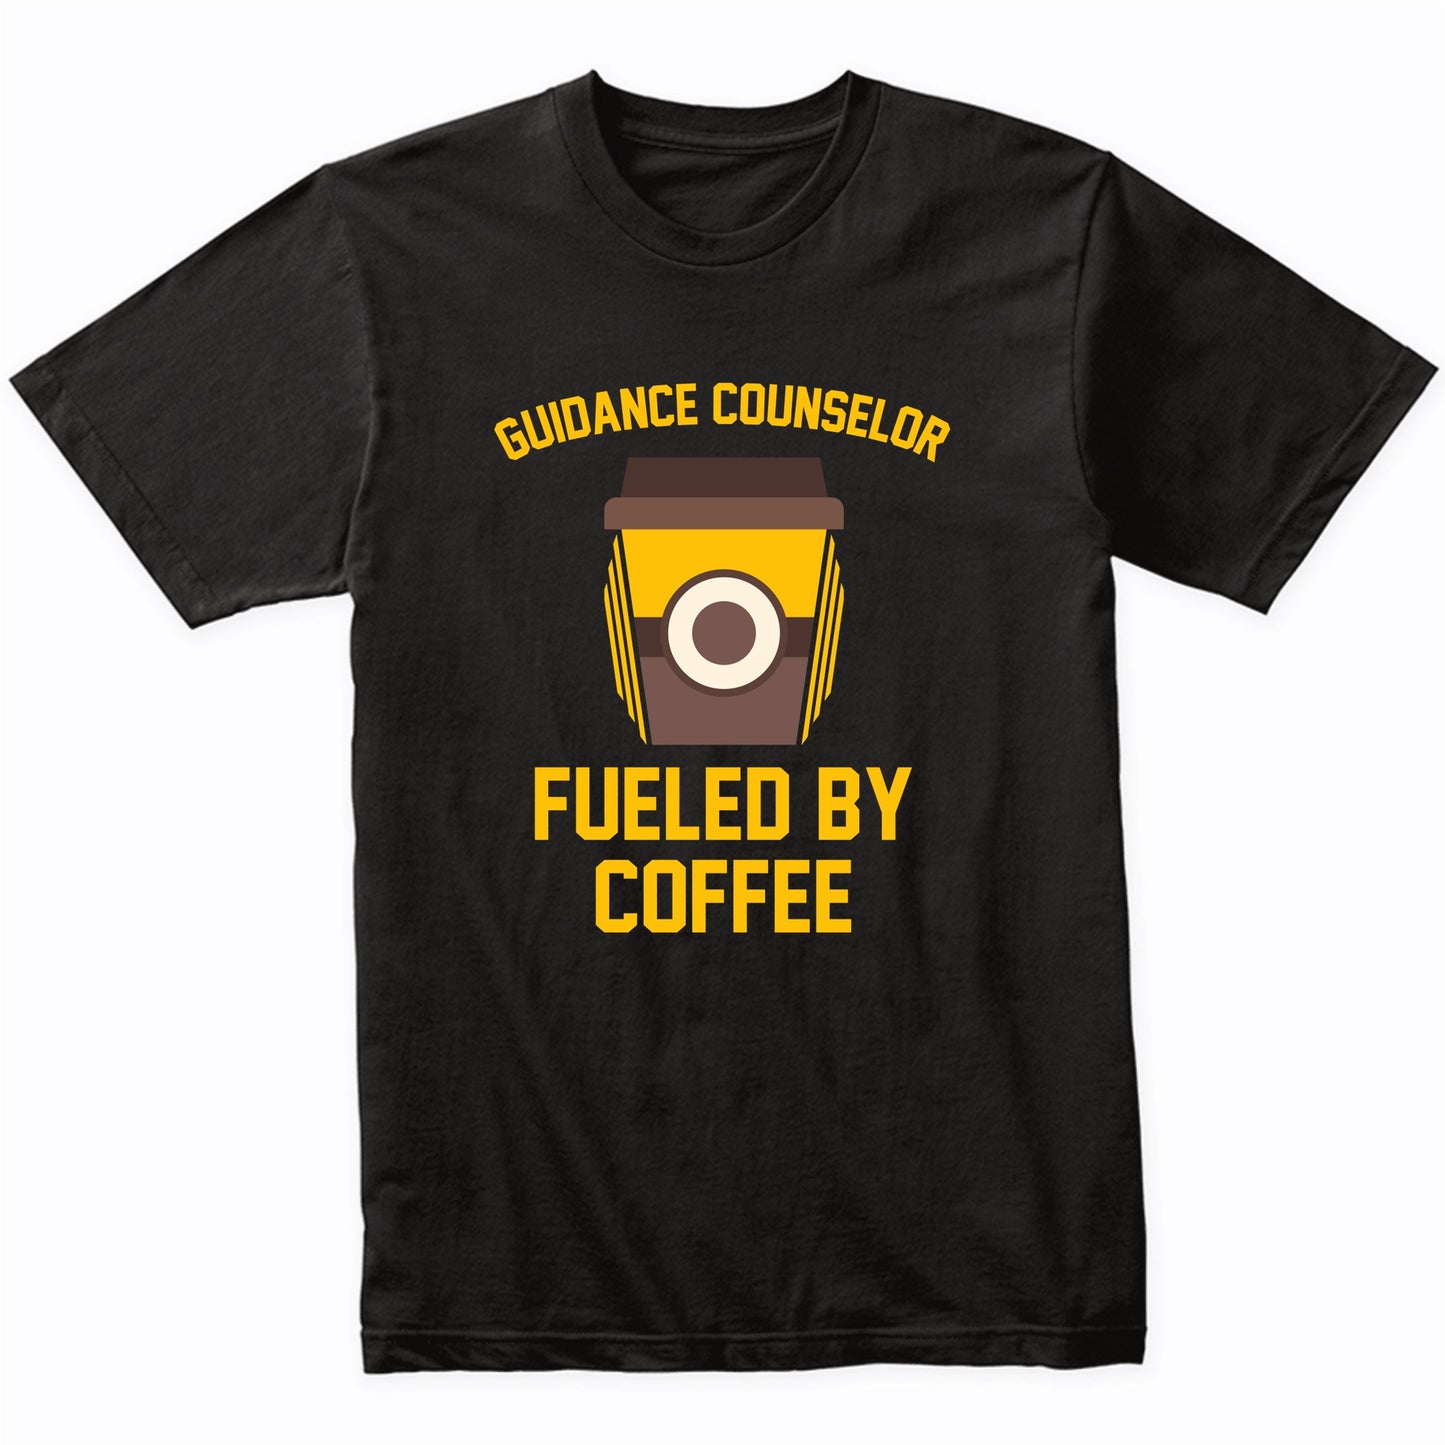 Guidance Counselor Fueled By Coffee Funny Shirt